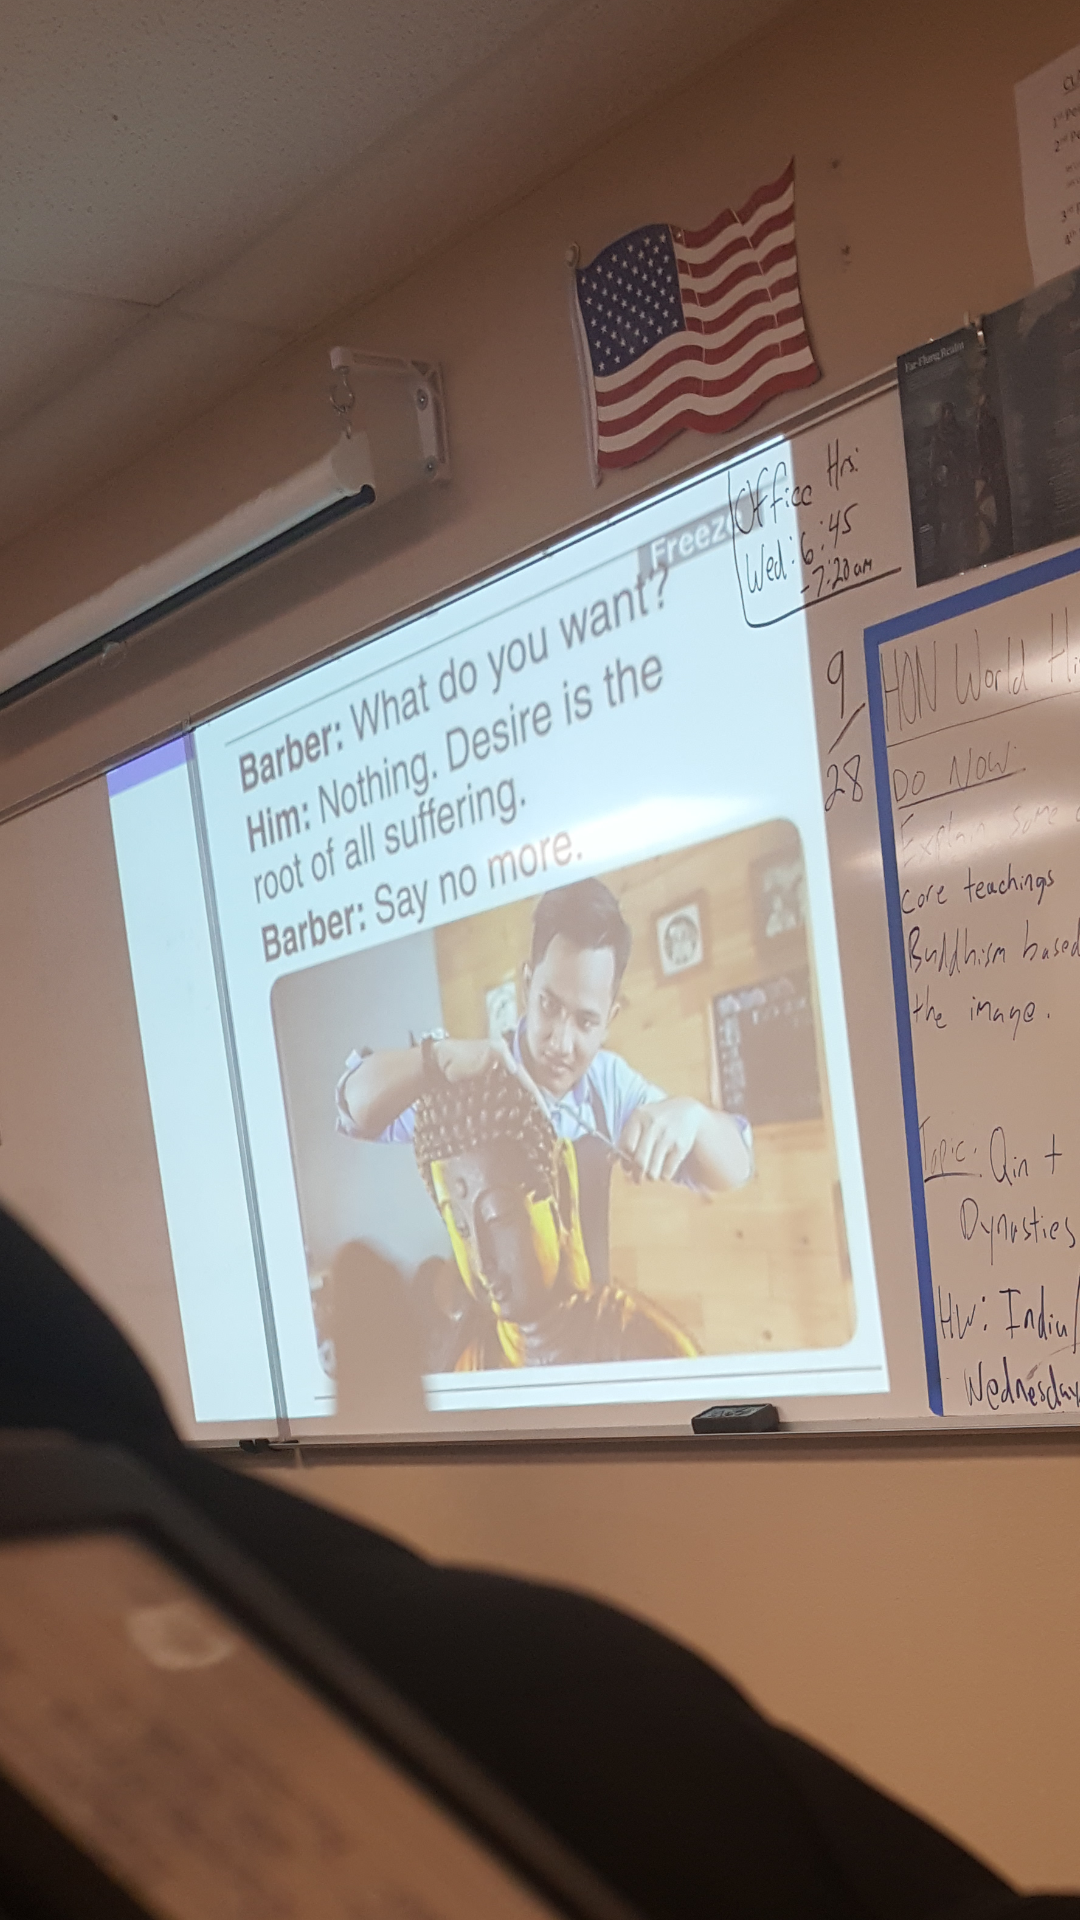 My History teacher wanted to show us his favorite meme of the week